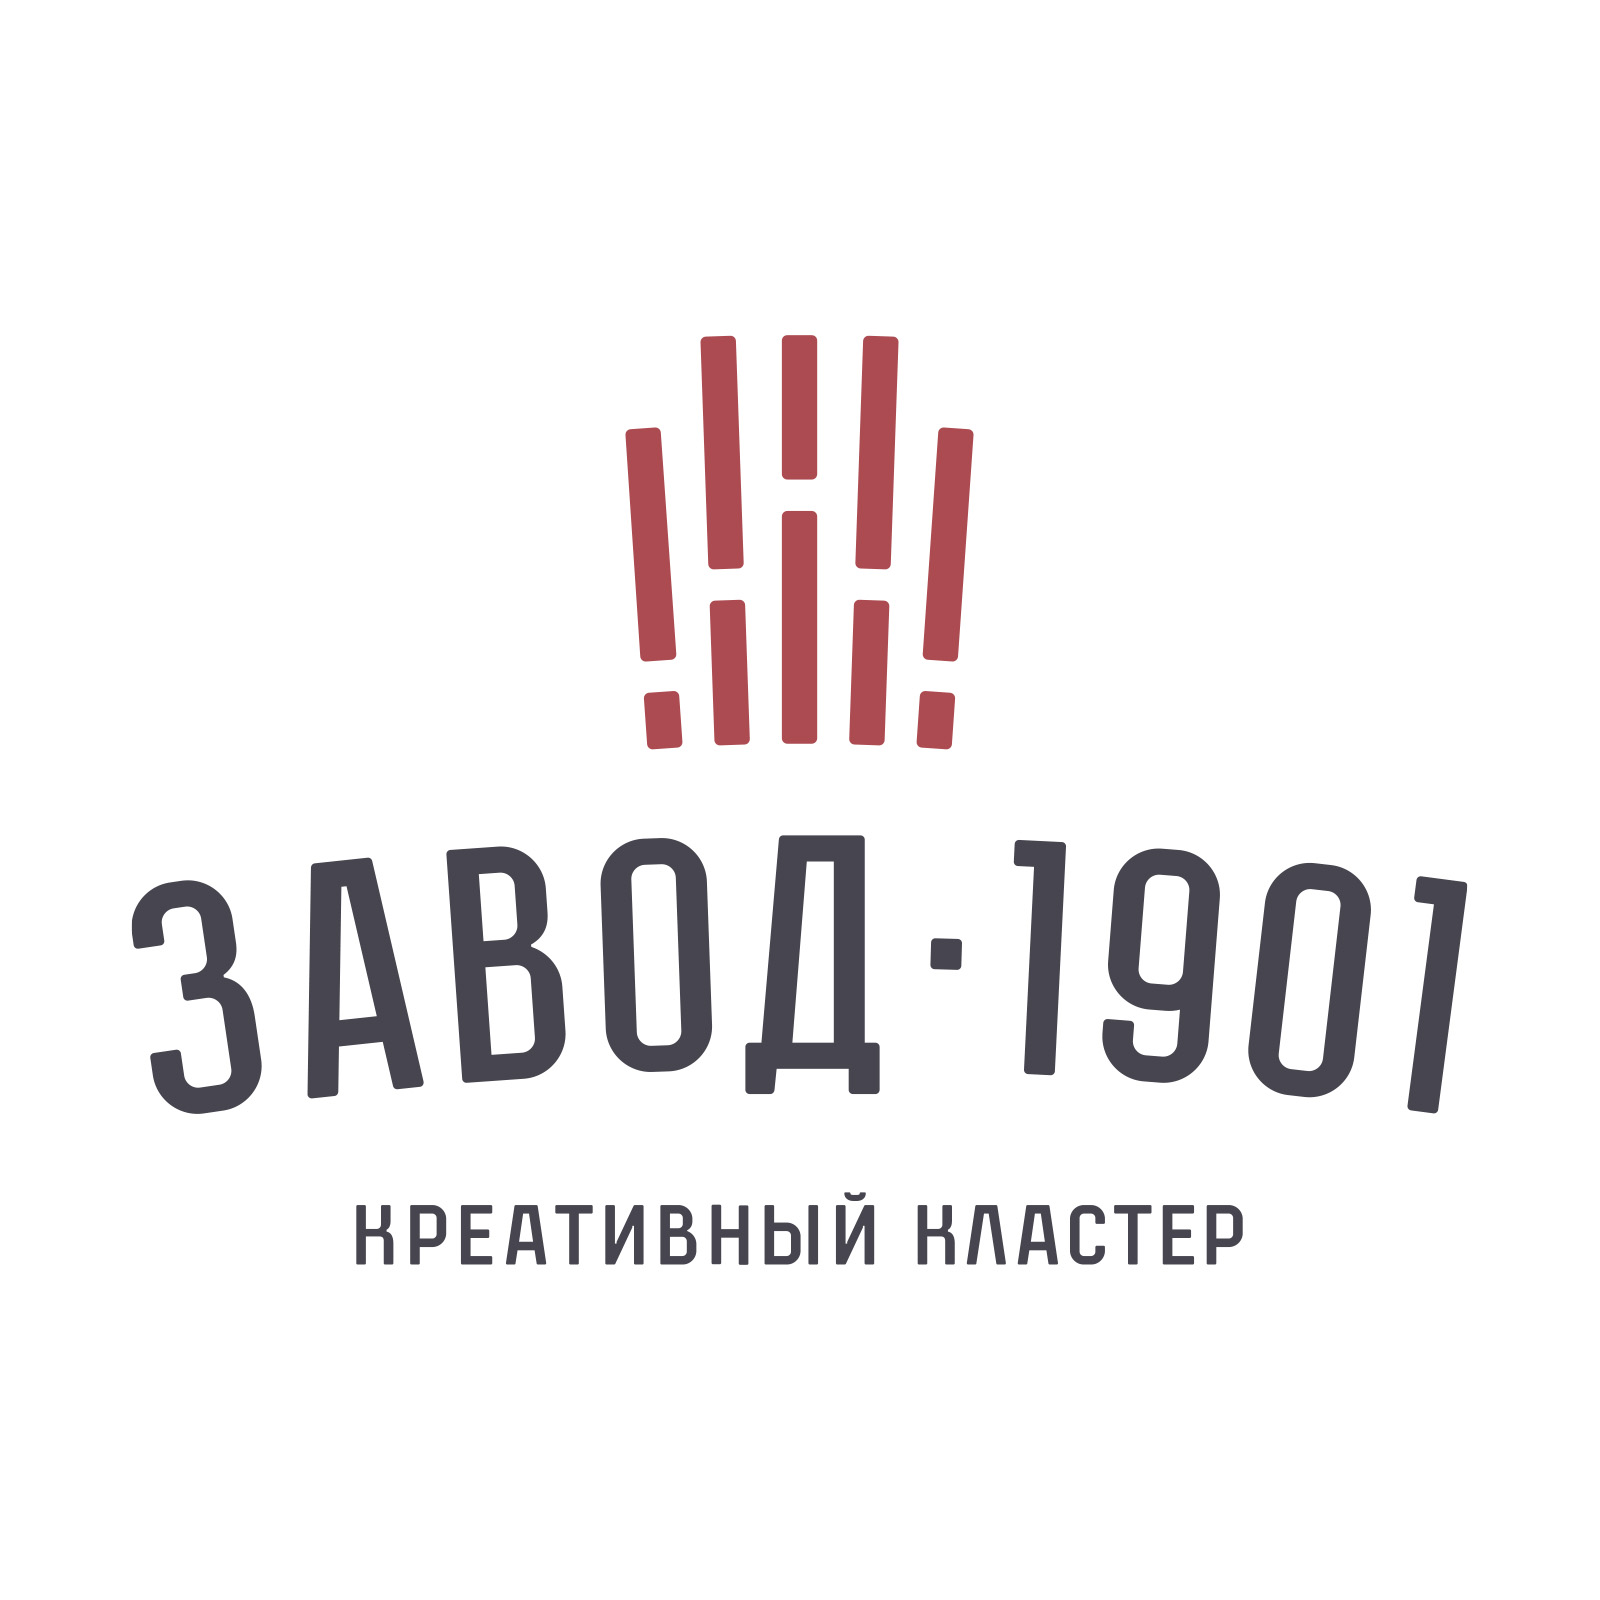 Zavod+1901 logo design by logo designer Stanislav+Regis for your inspiration and for the worlds largest logo competition